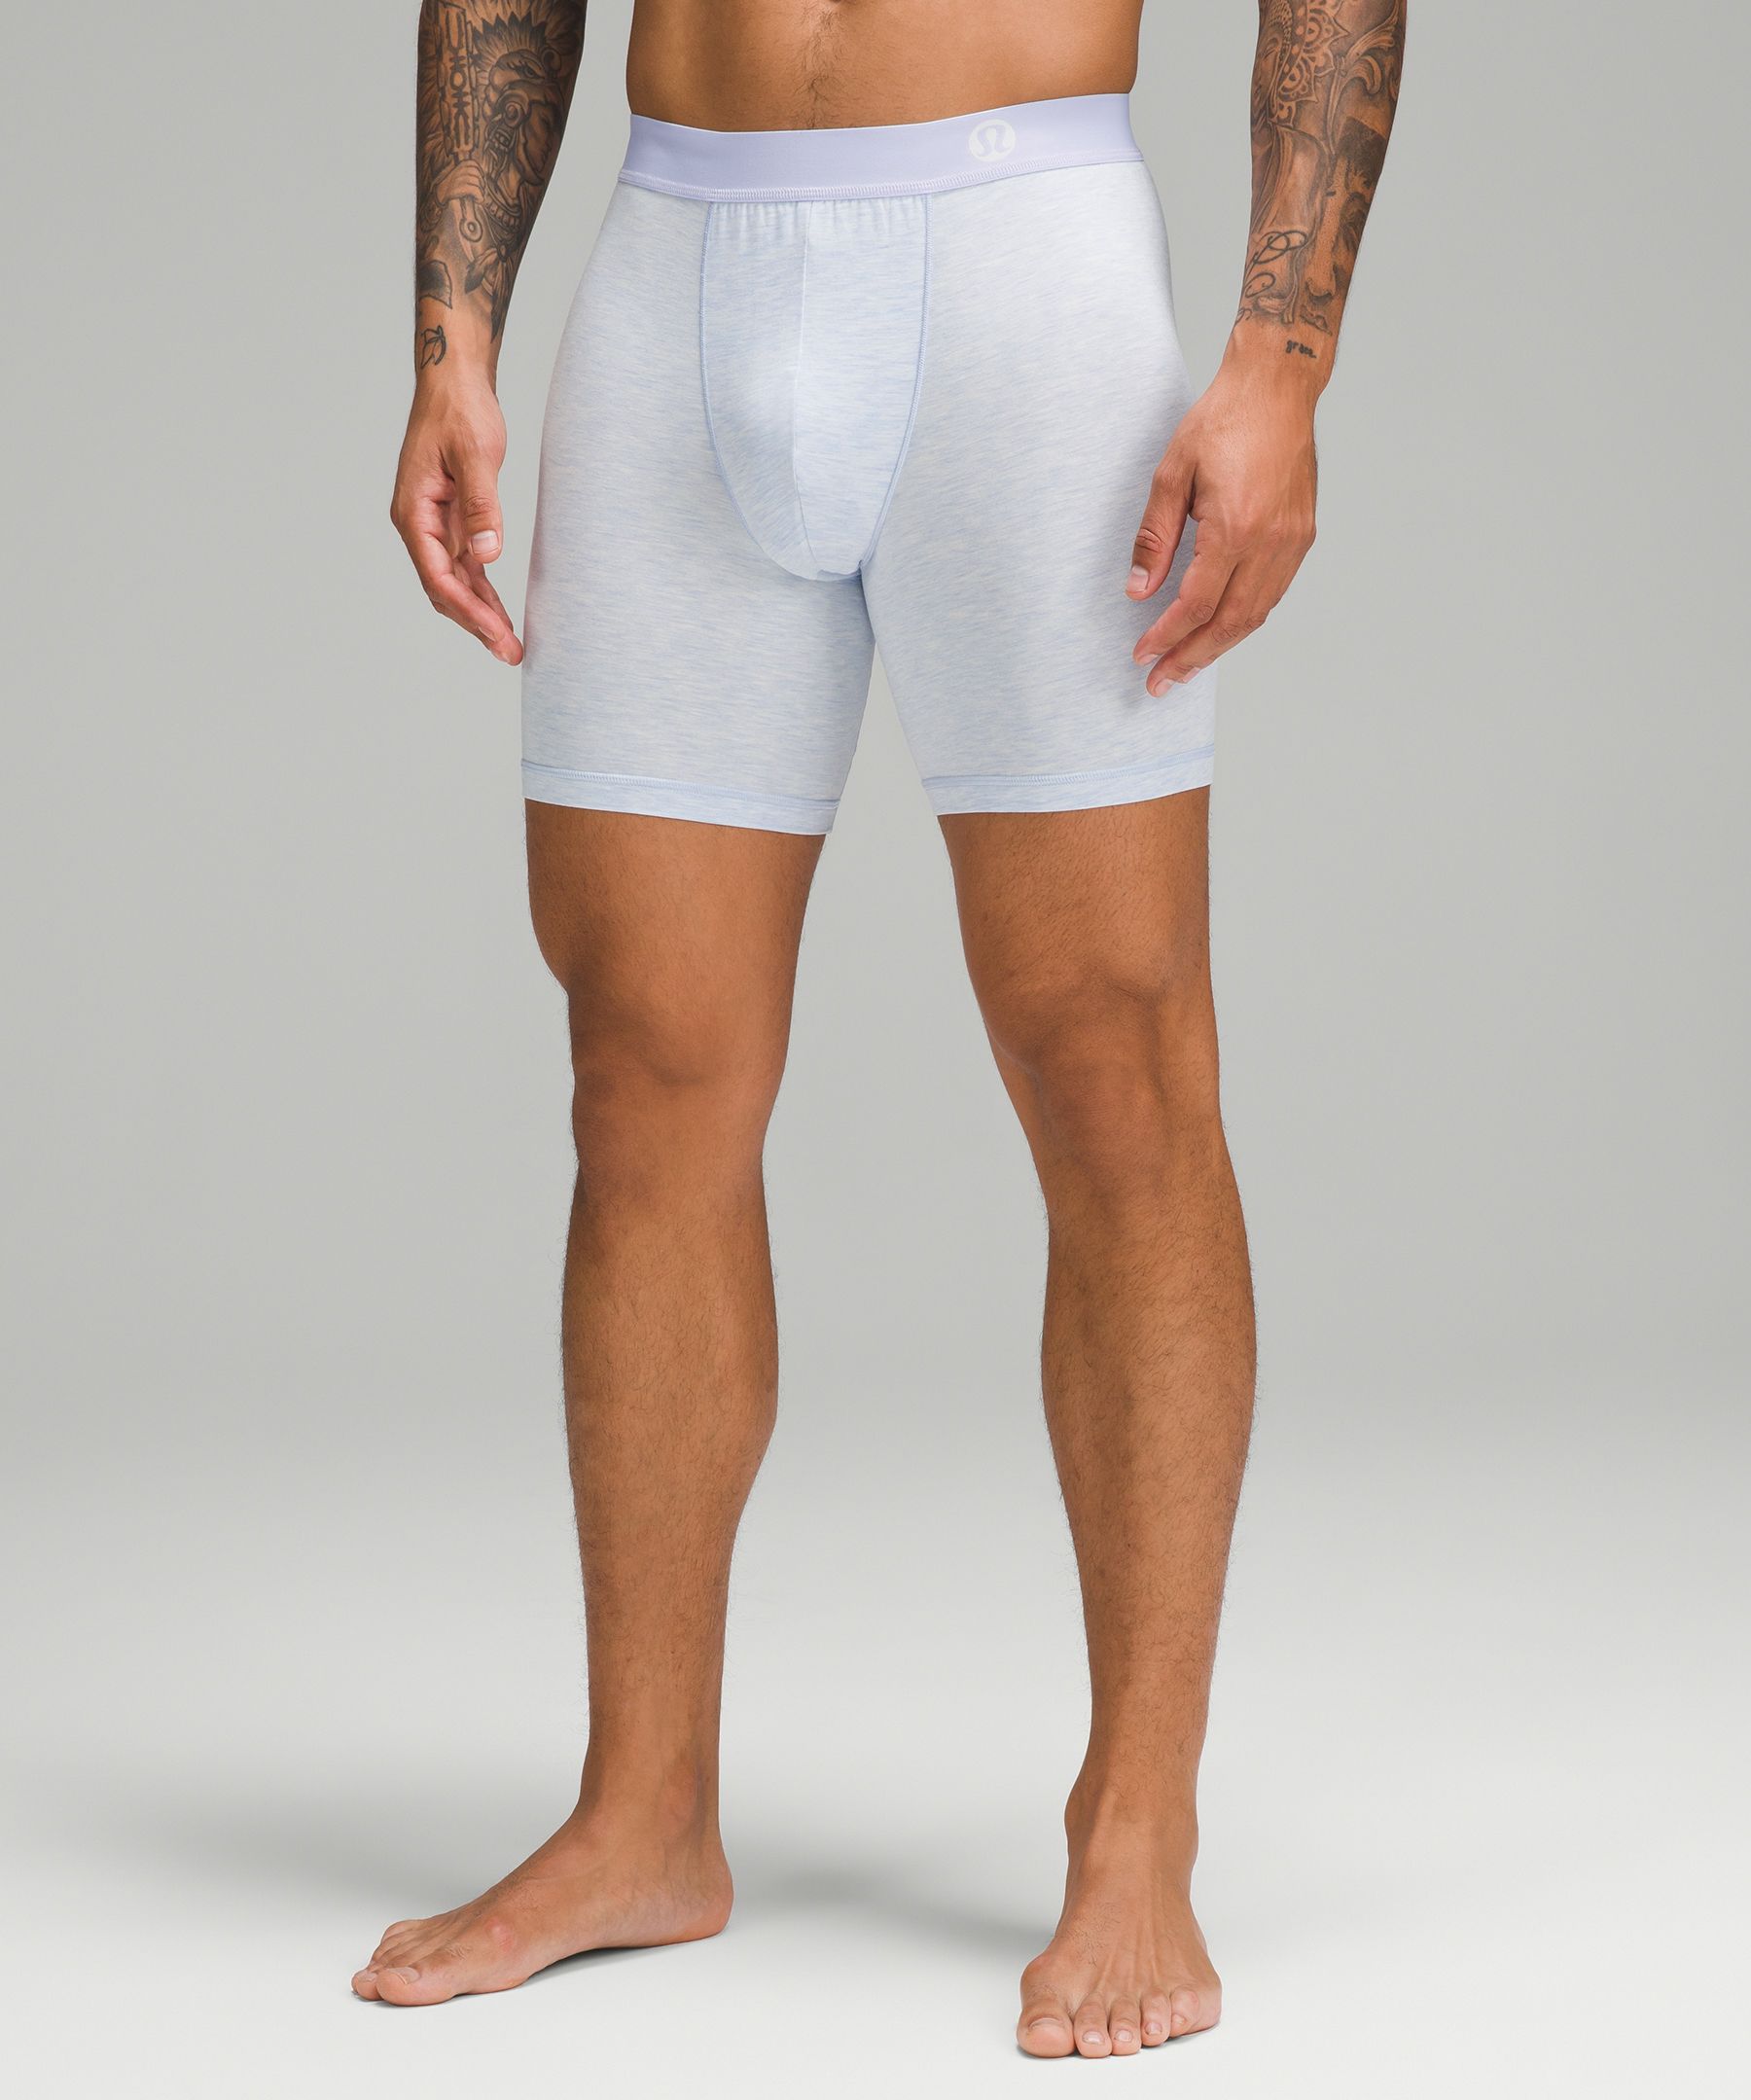 Lululemon athletica Built to Move Long Boxer 7 *2 Pack